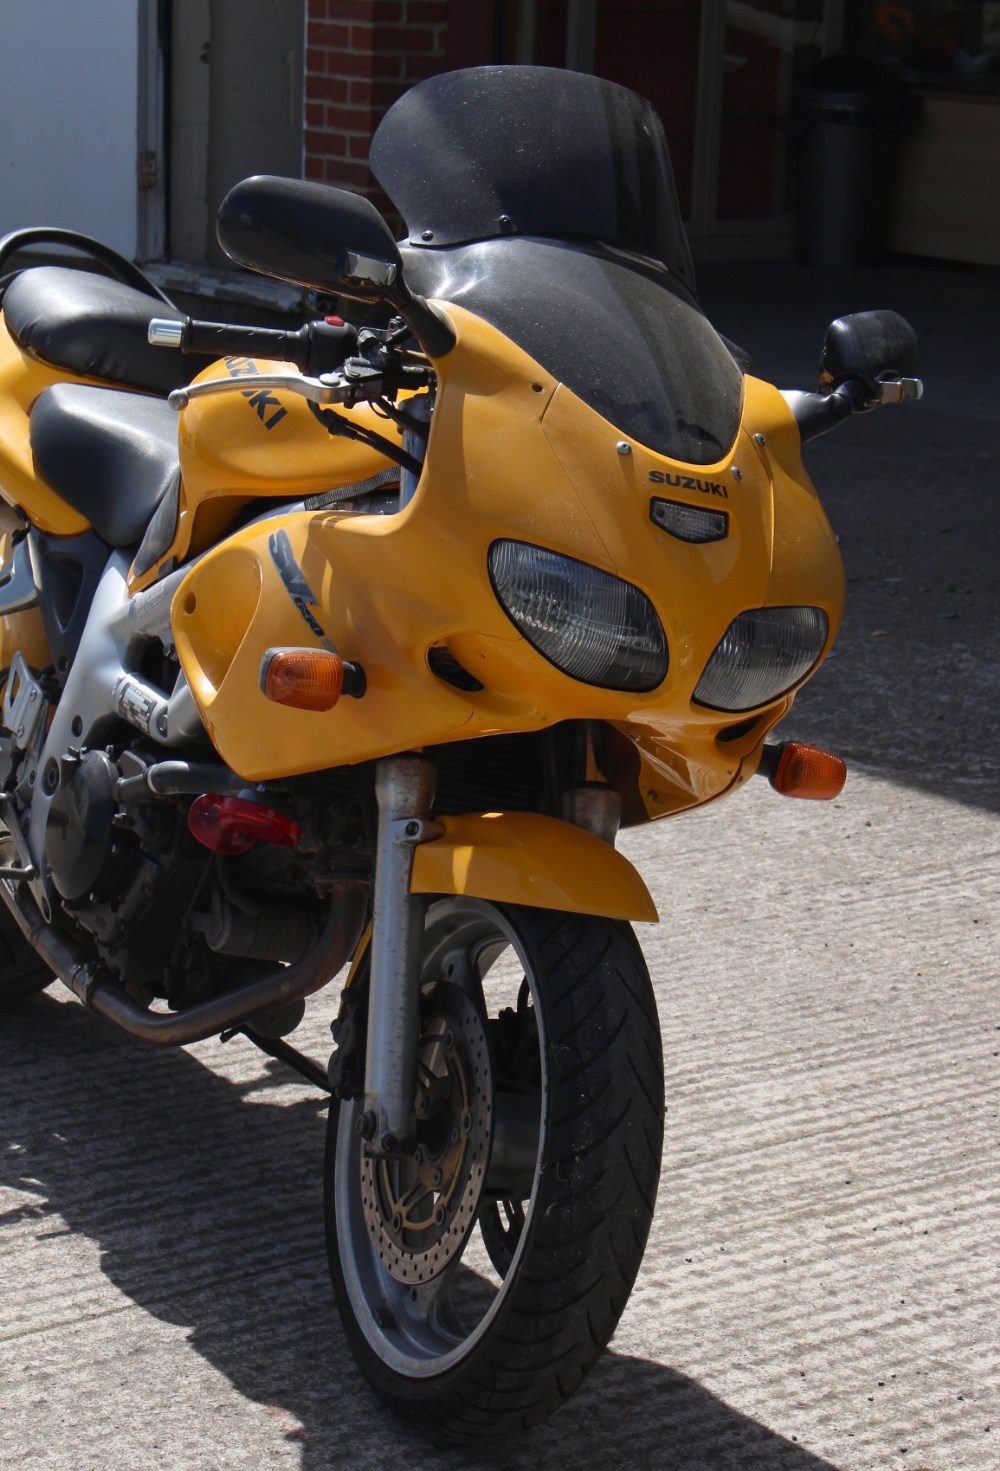 Property of a deceased estate - motorcycle or motorbike - a Suzuki SV650, yellow, registration - Image 2 of 4